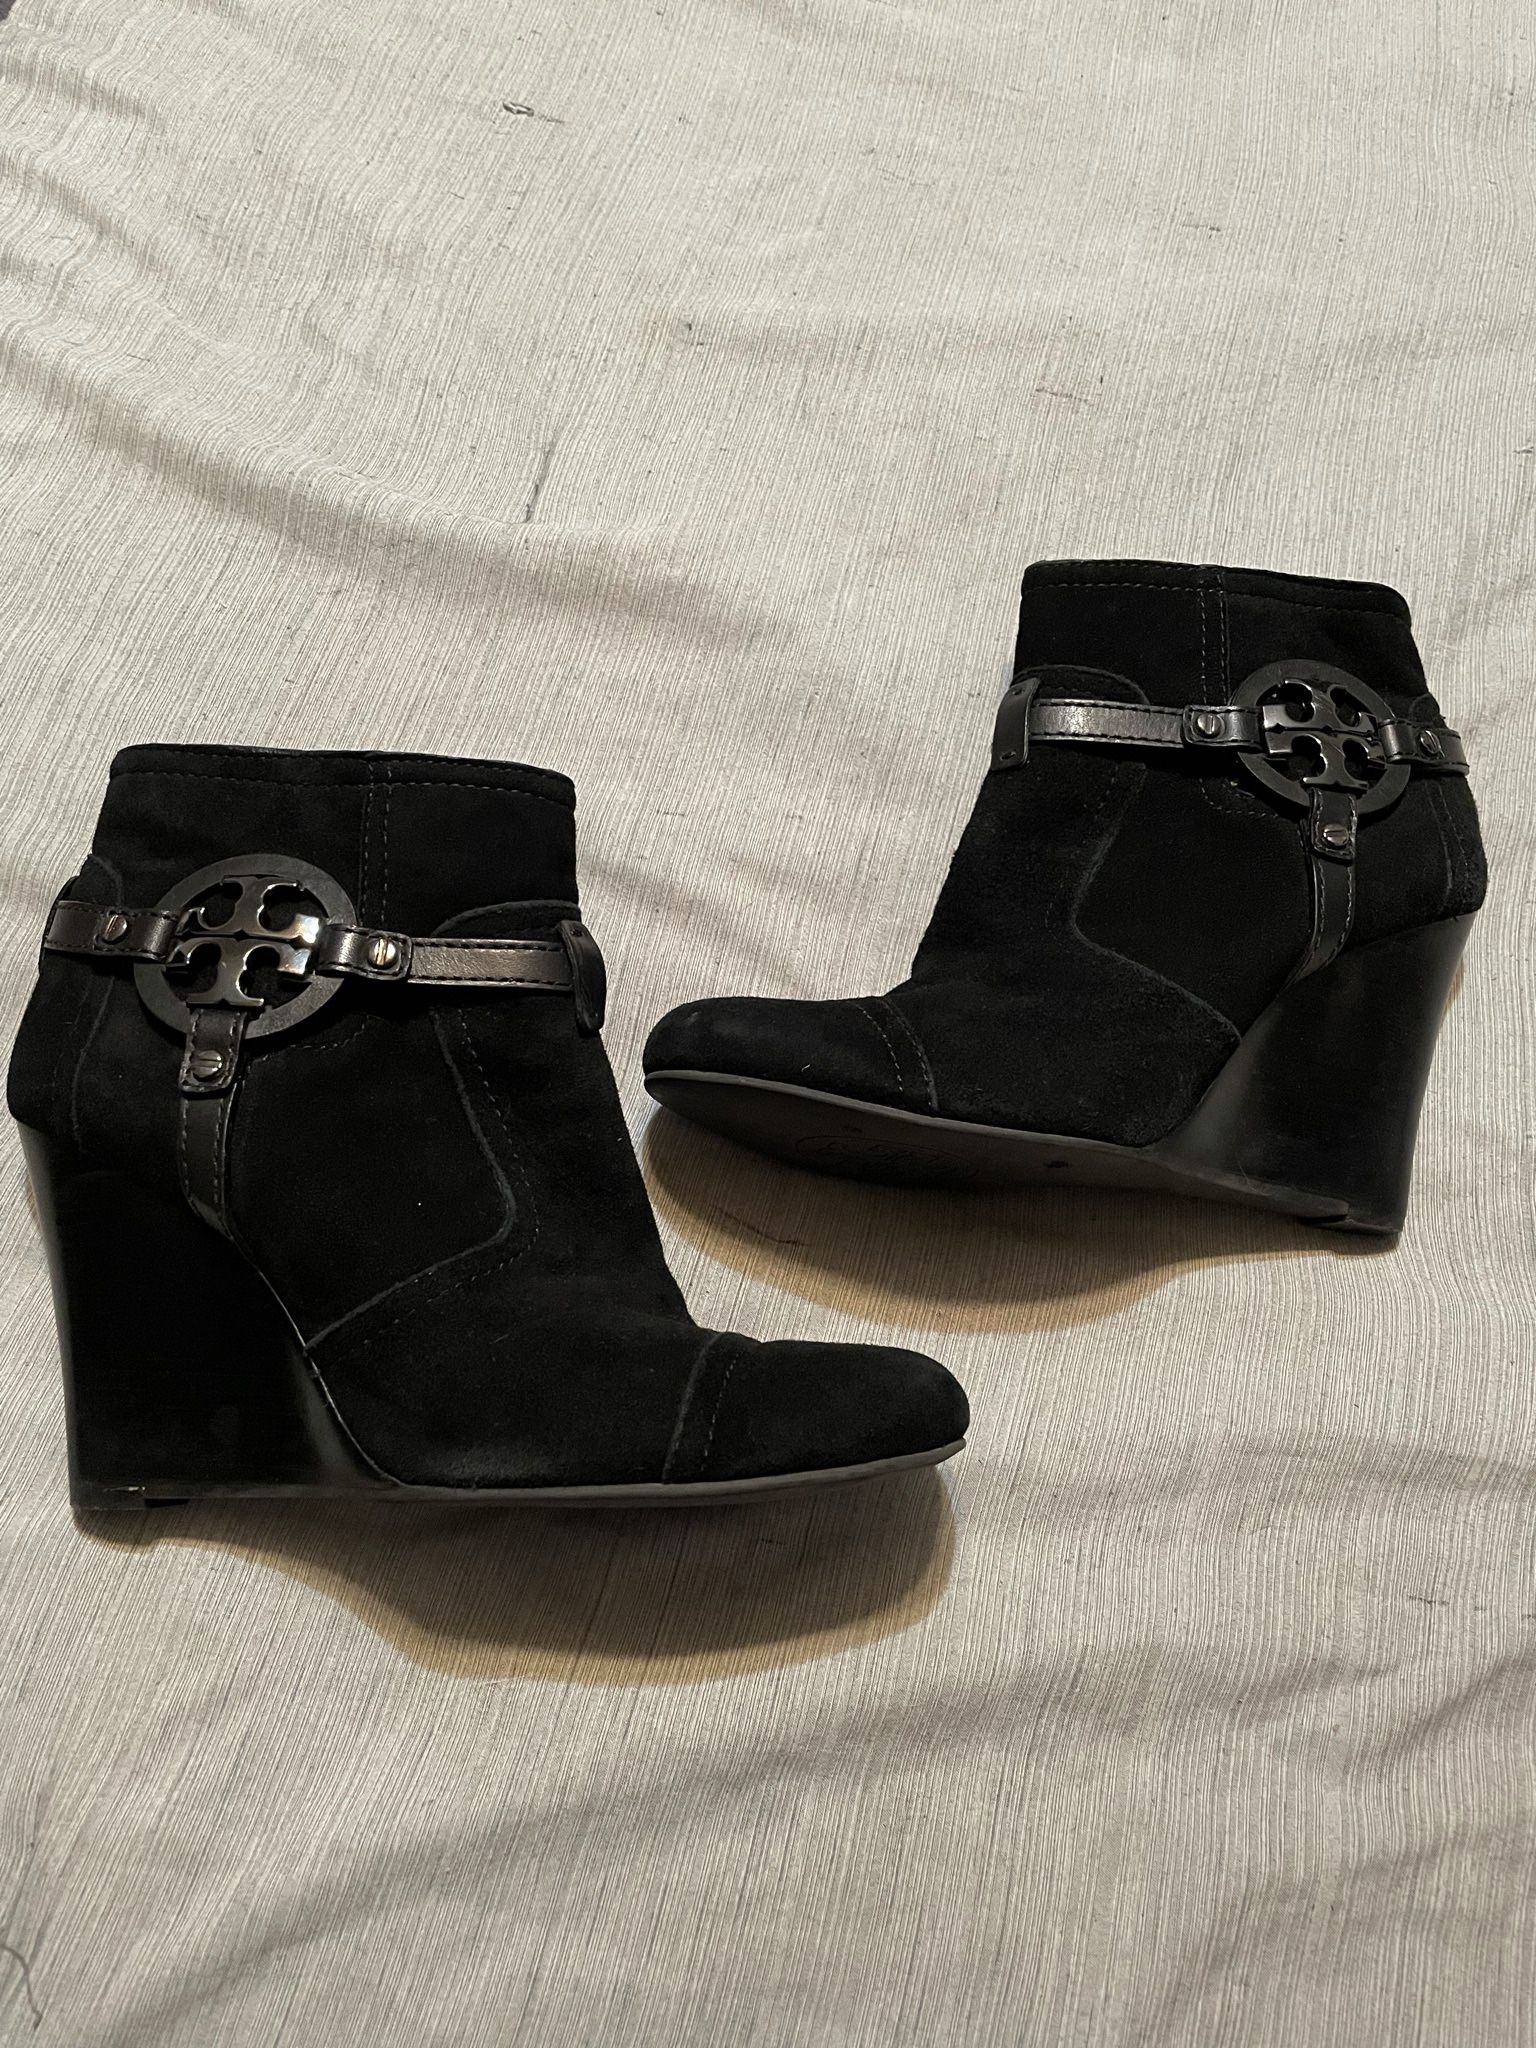 Like New Authentic Tory Burch Boots Size 8